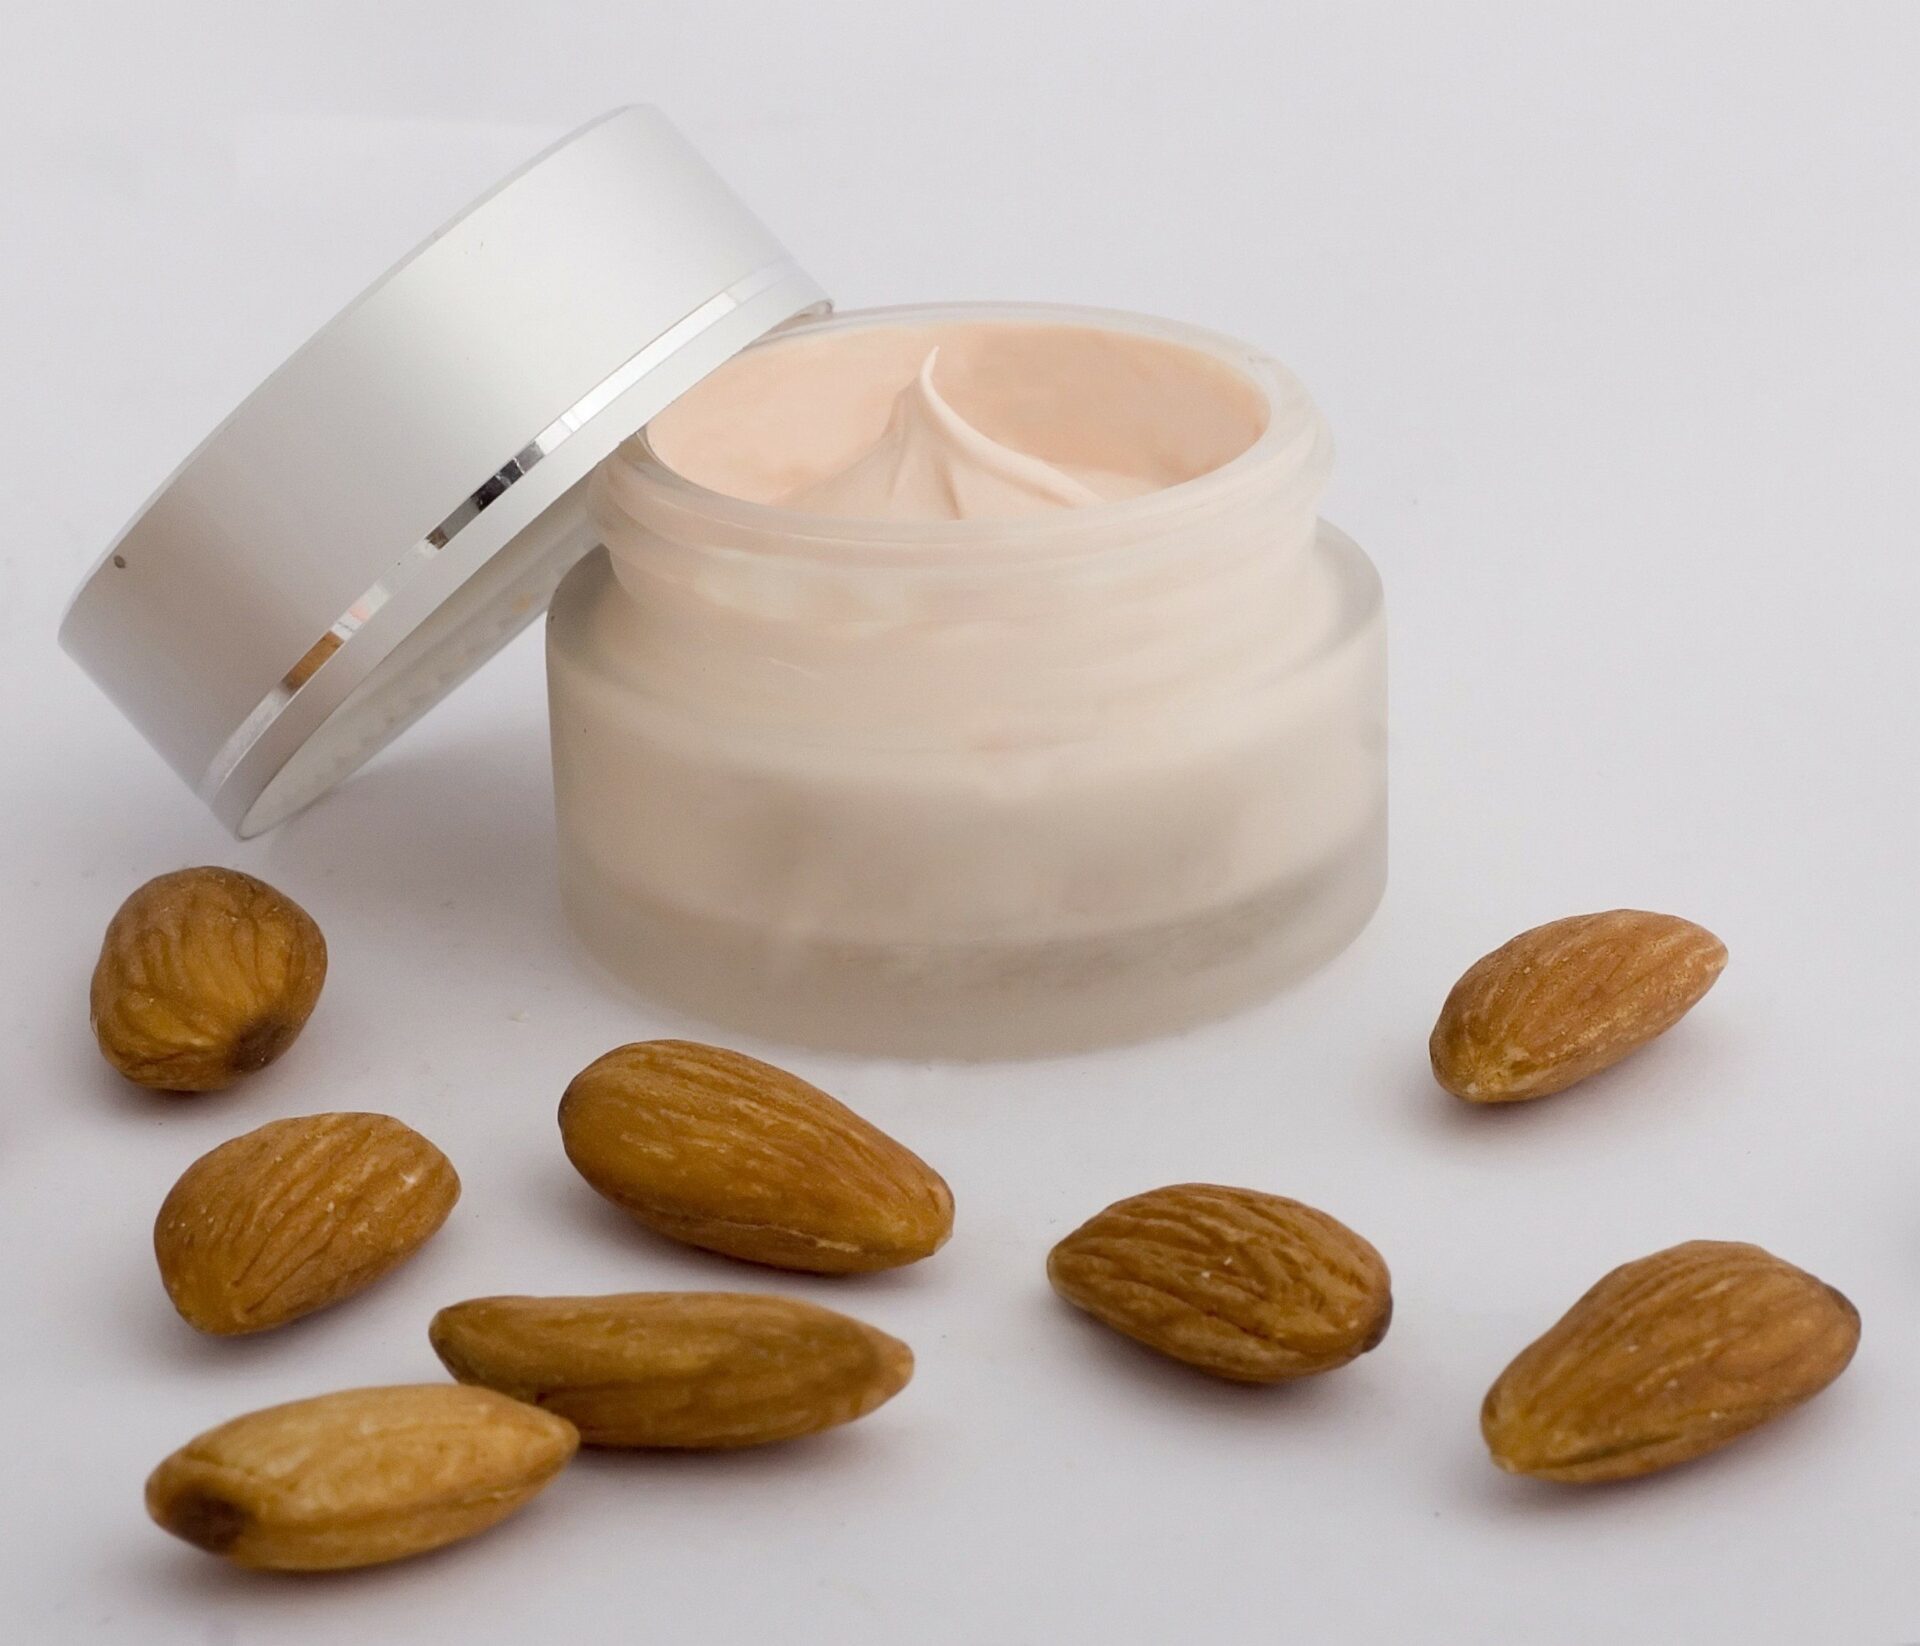 A Container of Skin Cream with Whole Almonds sitting in Front - Almond Oil in Cosmetics and Beauty Products